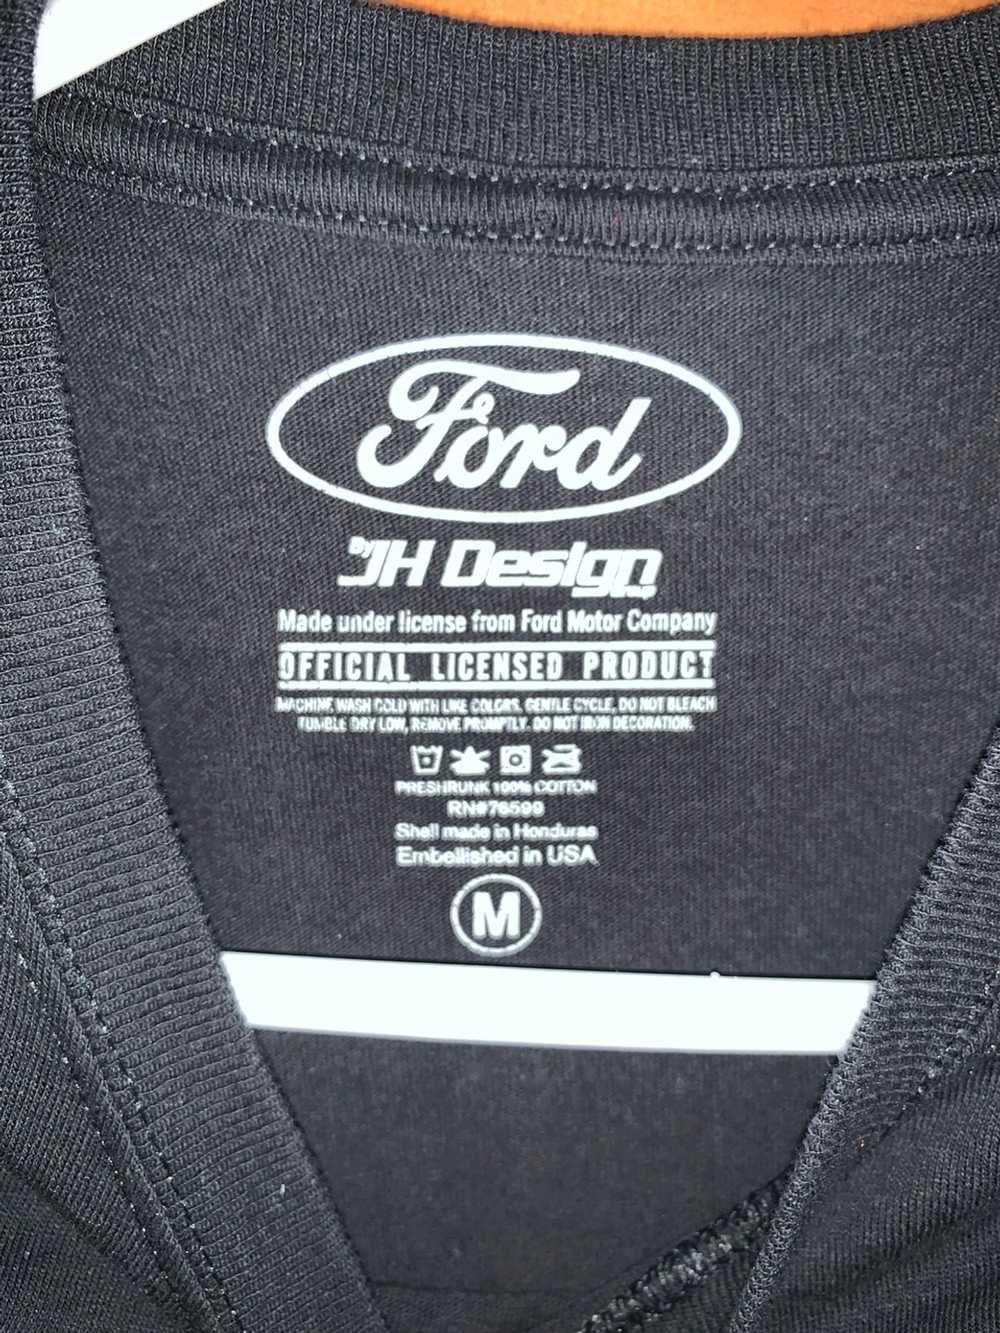 Ford × Jh Design VintageFord Mustang Graphic T - image 2